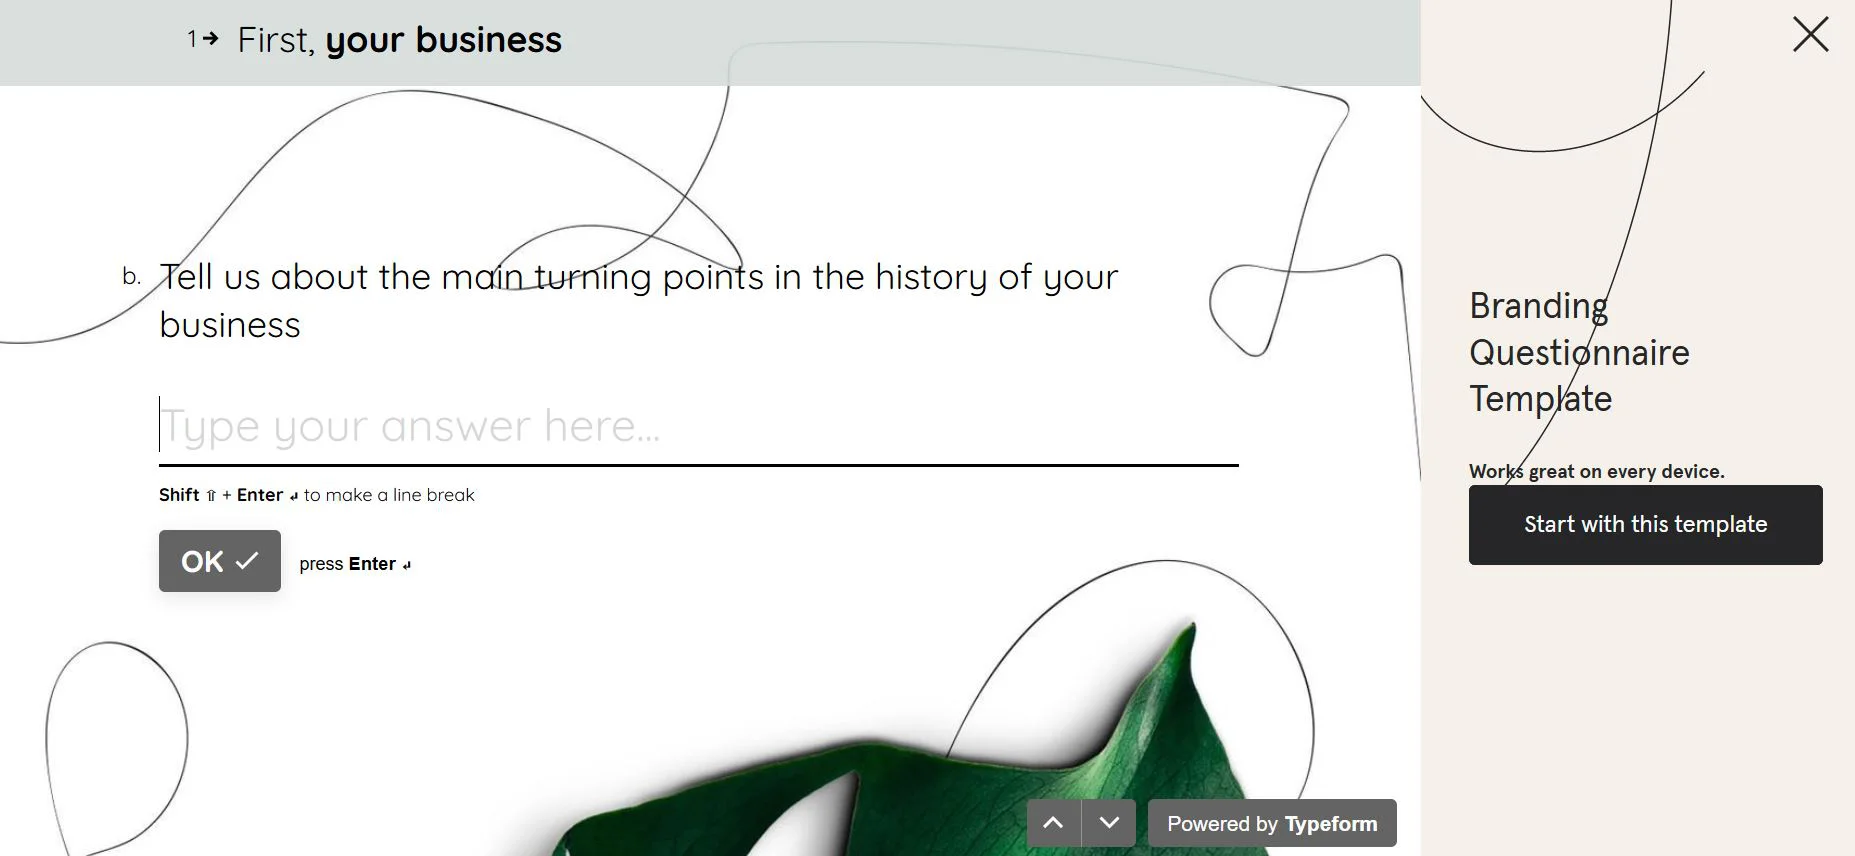 A screenshot of the branding questionnaire template from Typeform.